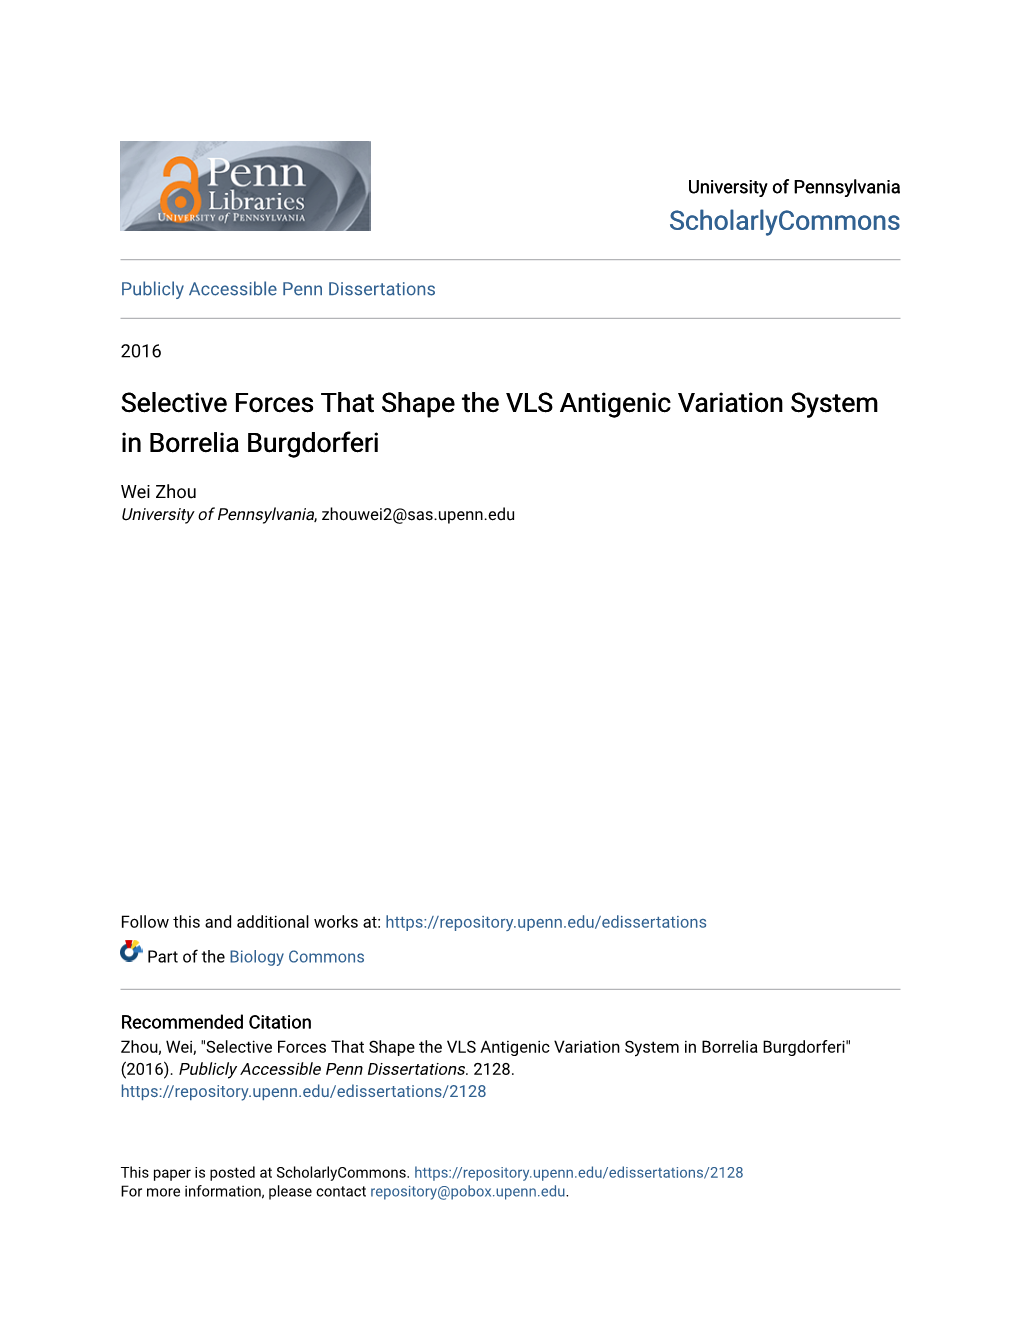 Selective Forces That Shape the VLS Antigenic Variation System in Borrelia Burgdorferi